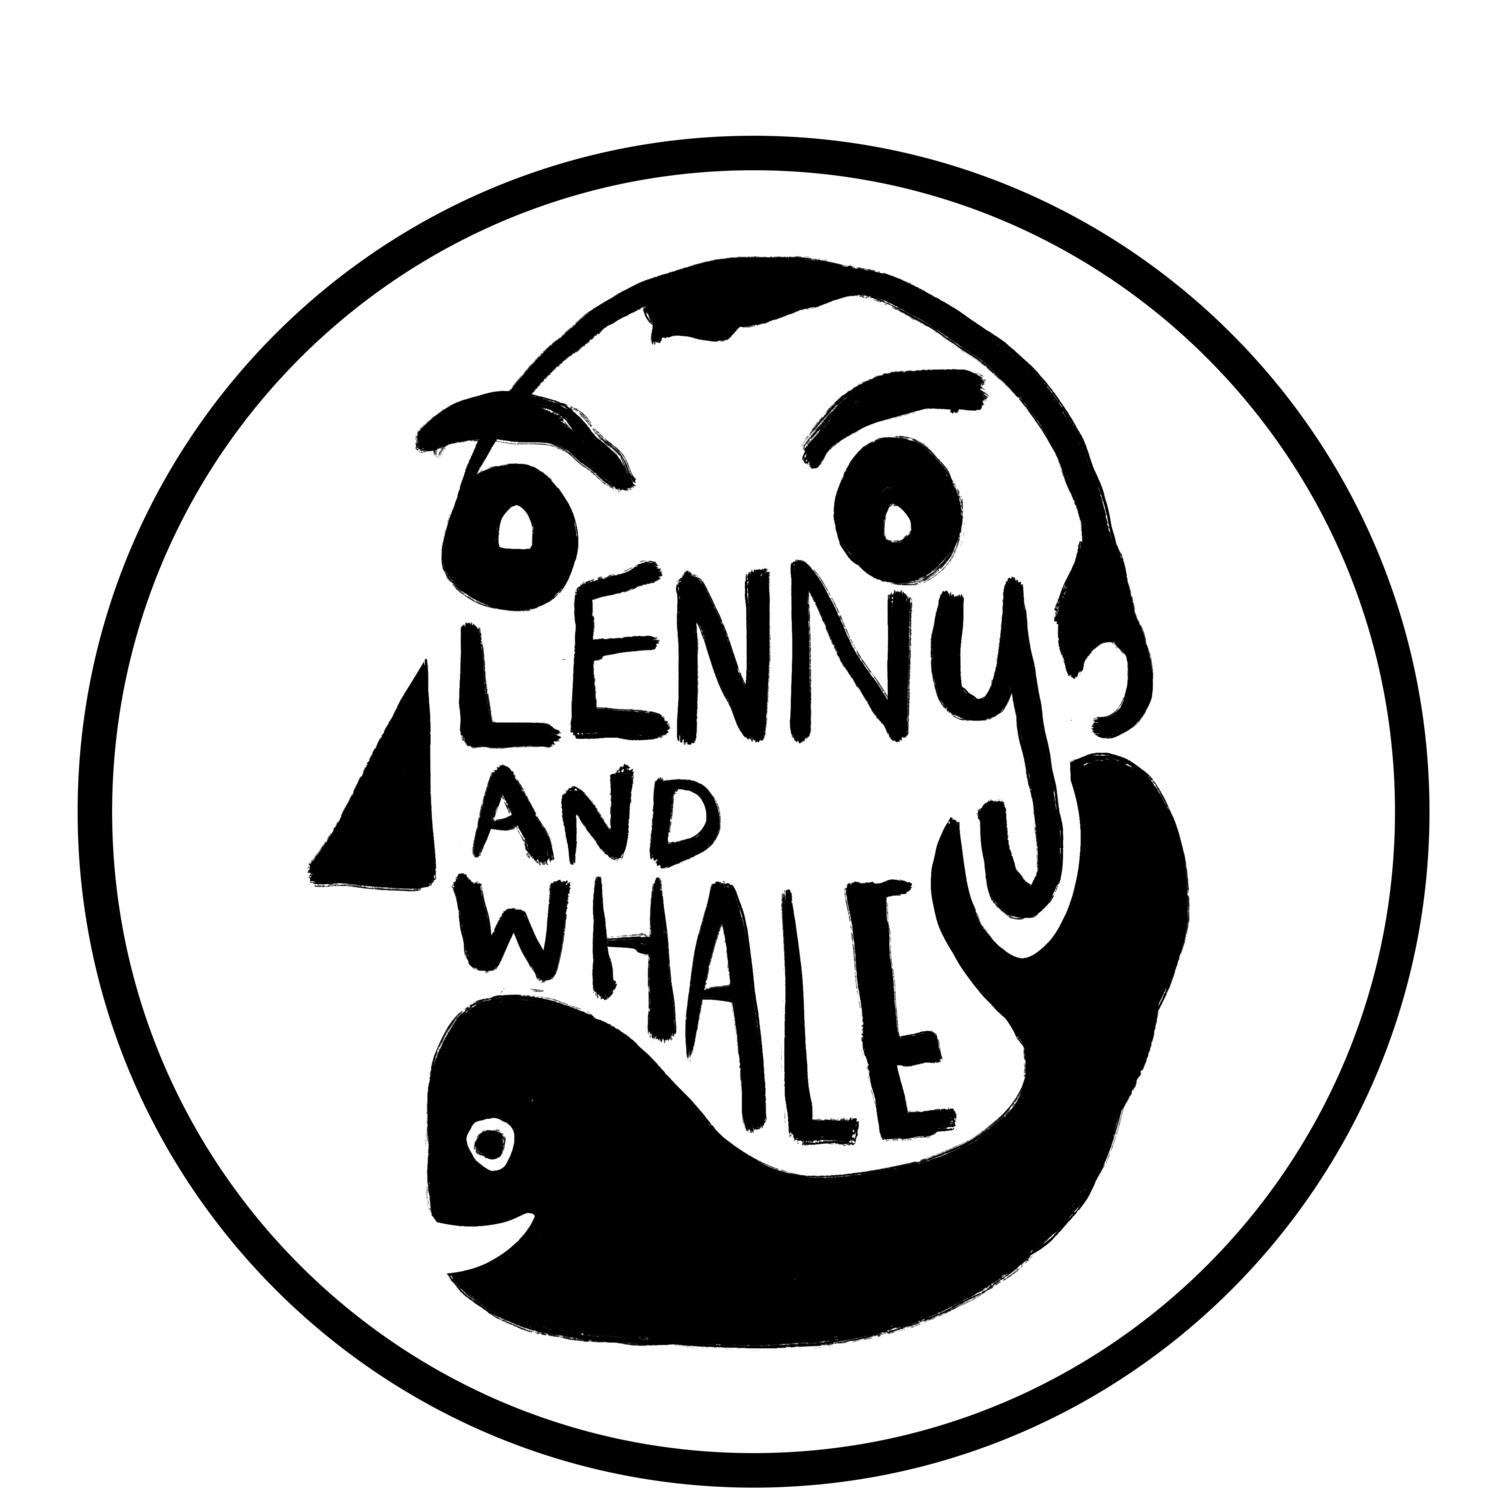 Lenny and Whale